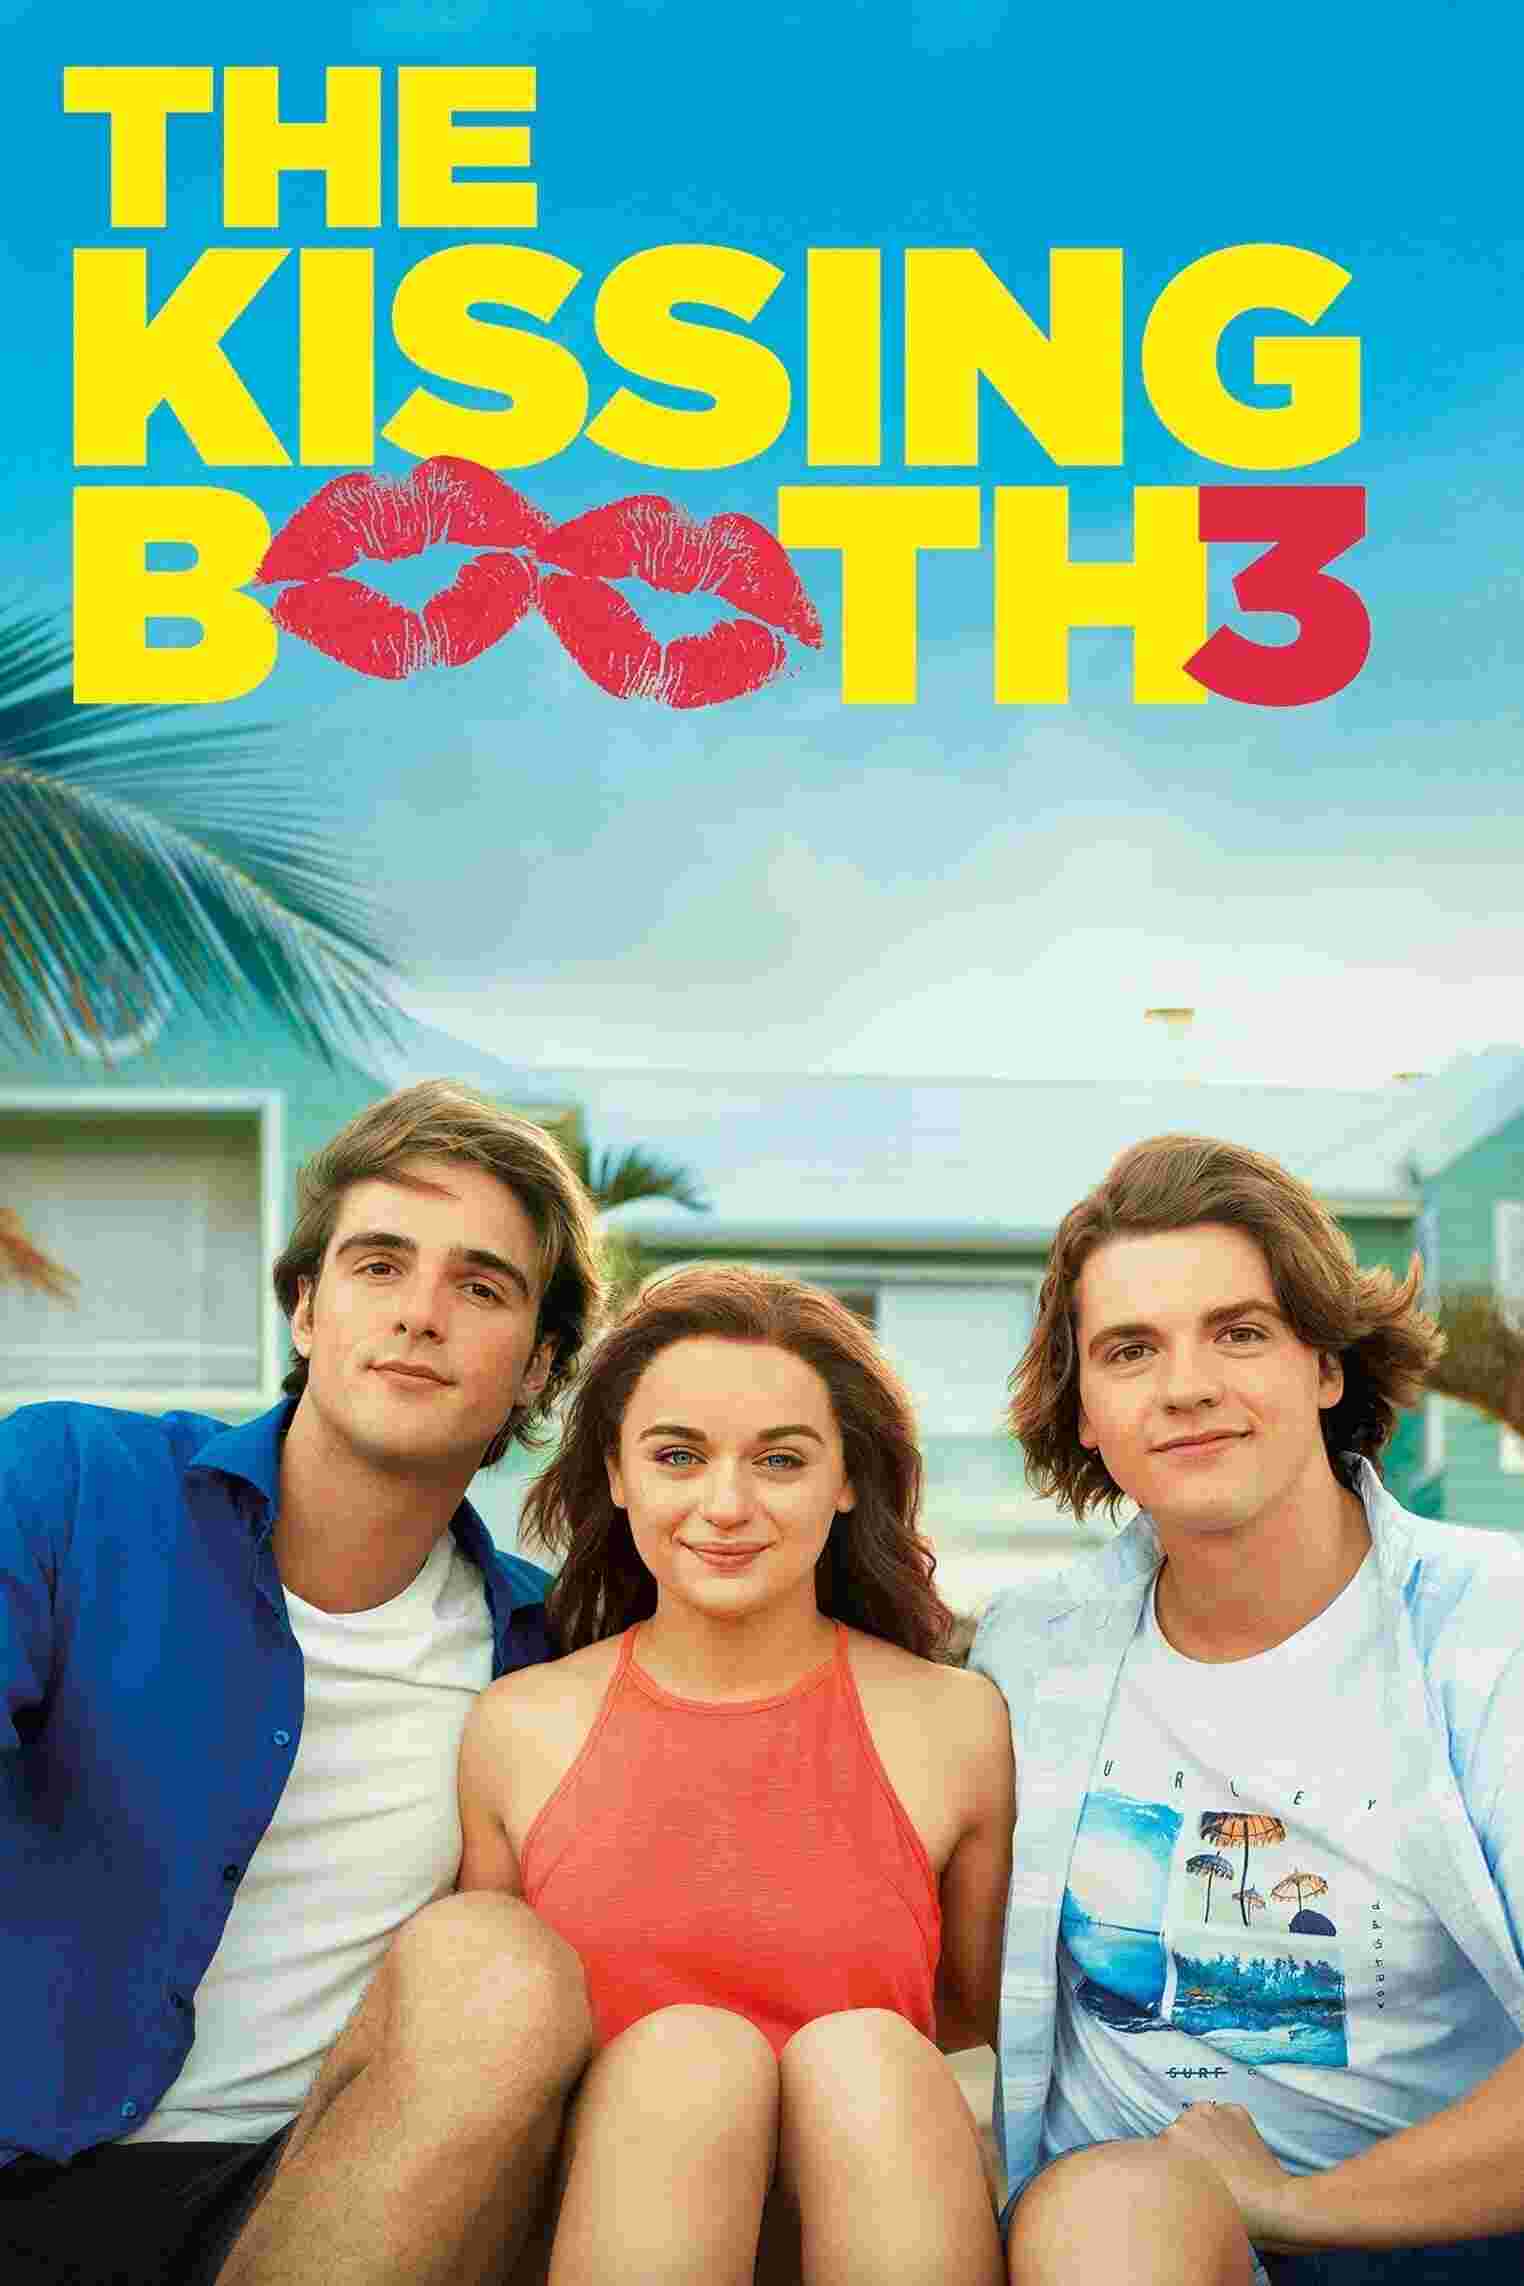 The Kissing Booth 3 (2021) Joey King